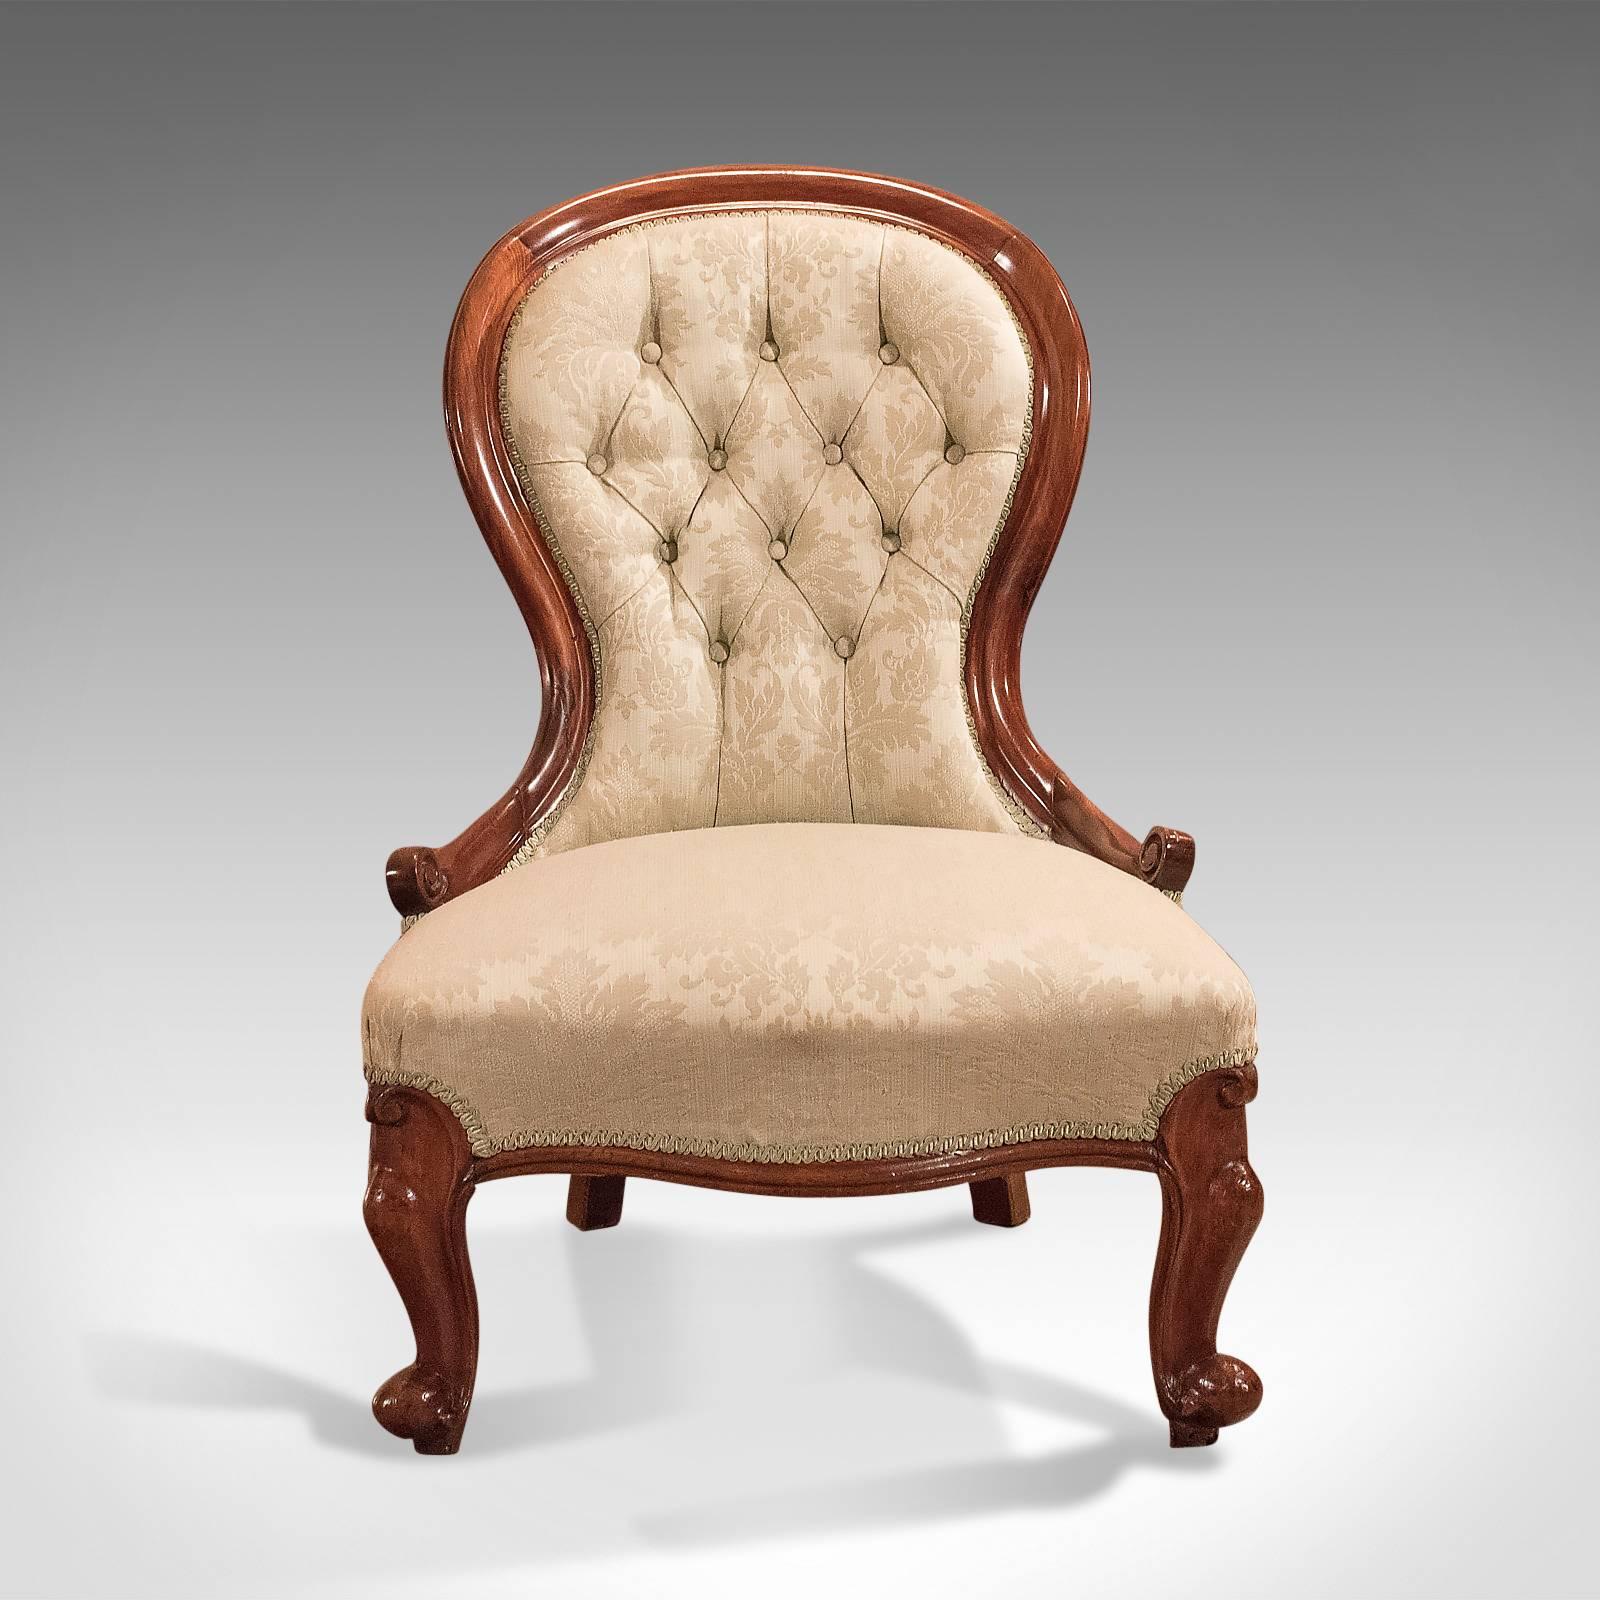 This is a Classic Victorian, antique salon chair dating to the early 19th century, circa 1840.

Raised on stout, oblique cabriole legs.
Featuring bulbous knee and scrolled toe.
Swept and shaped rear legs.

Serpentine front seat rail.
Dished